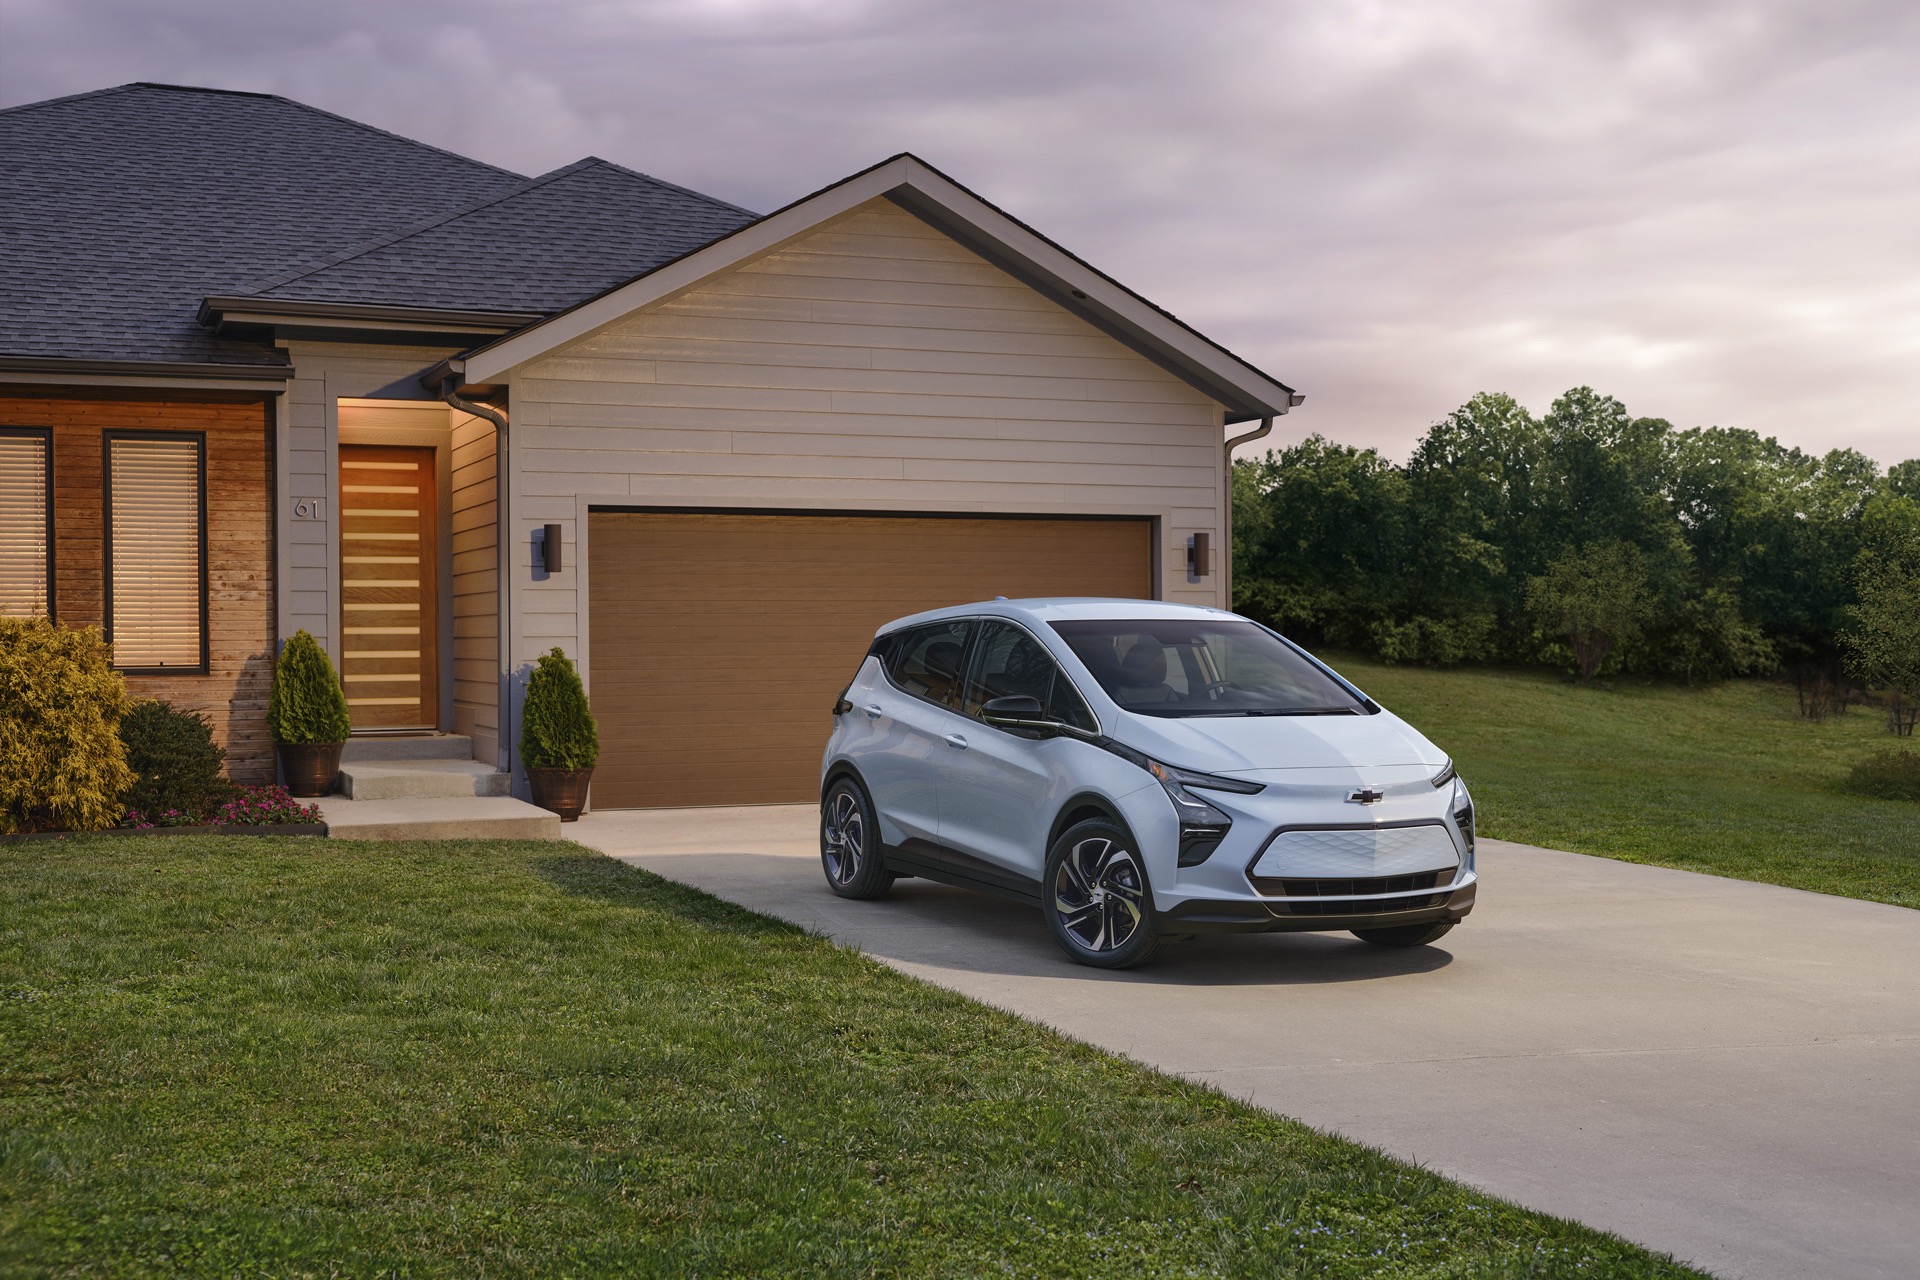 EV market share fell in Q1, in a dearth of affordable models